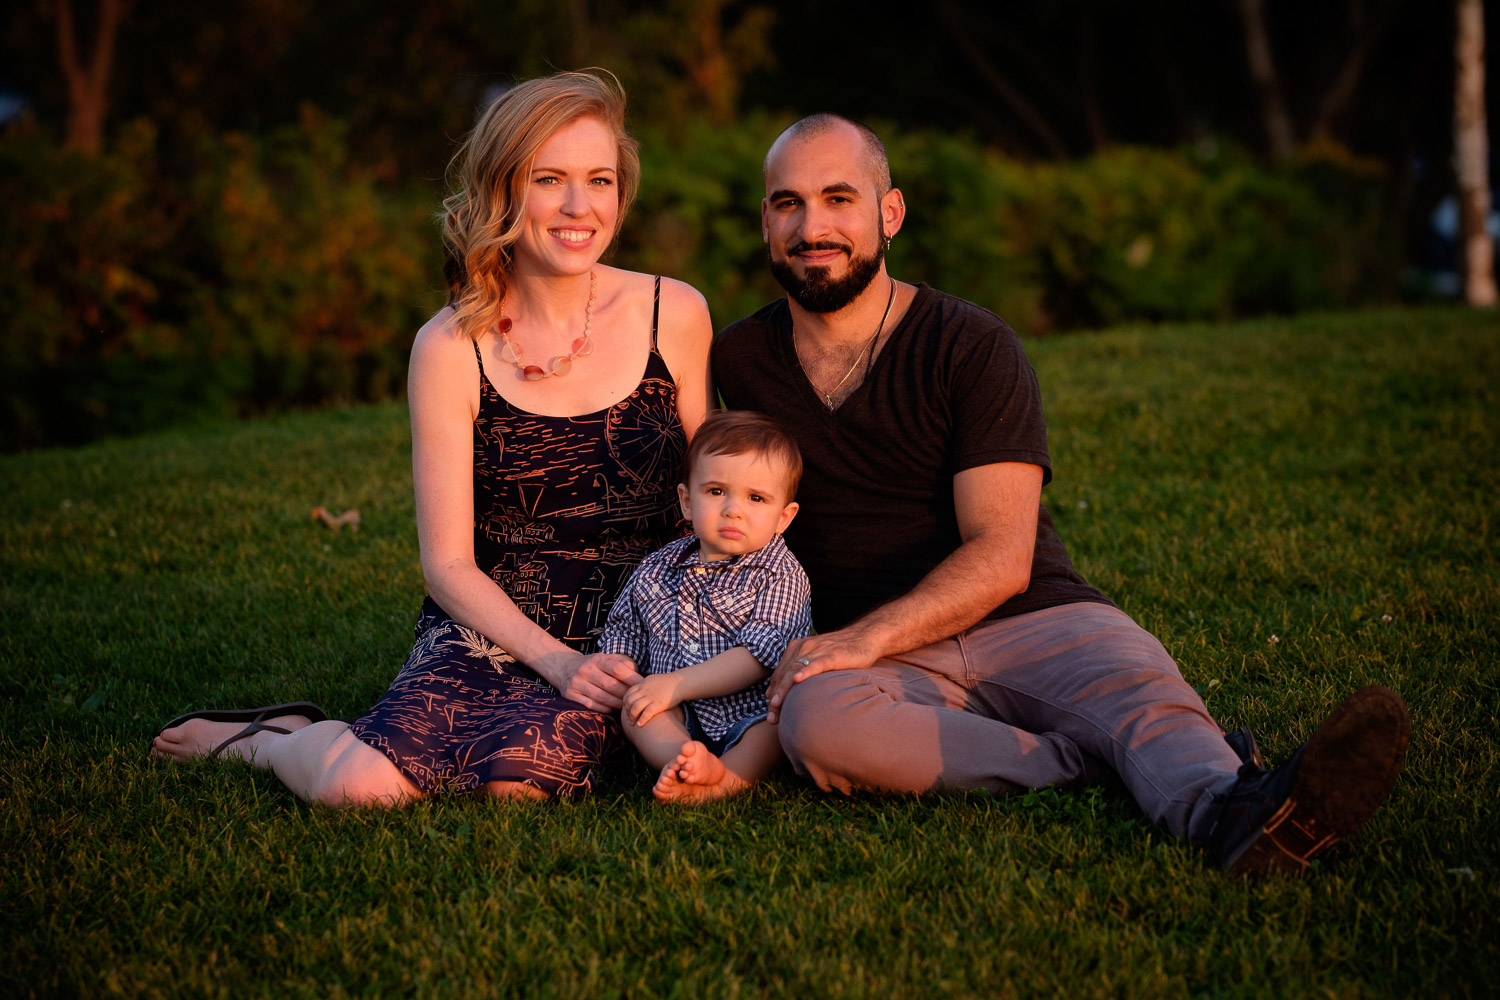  Family photography by Scott Williams from a afternoon golden hour portrait session at Pier 4 Park in Hamilton, Ontario. 